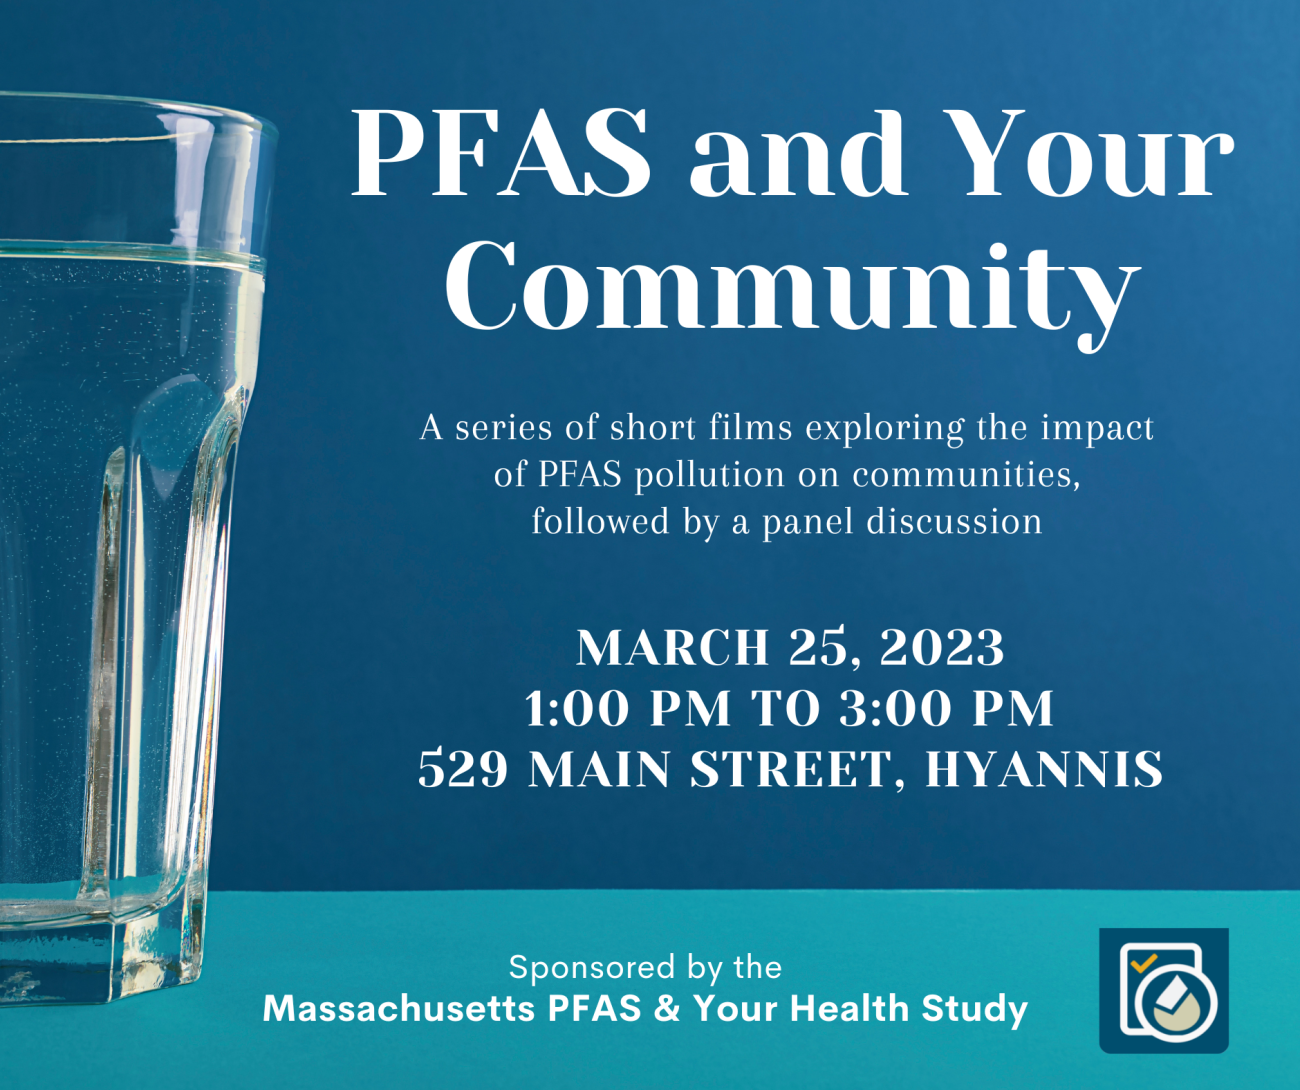 PFAS and Your Community: Film screening and panel discussion